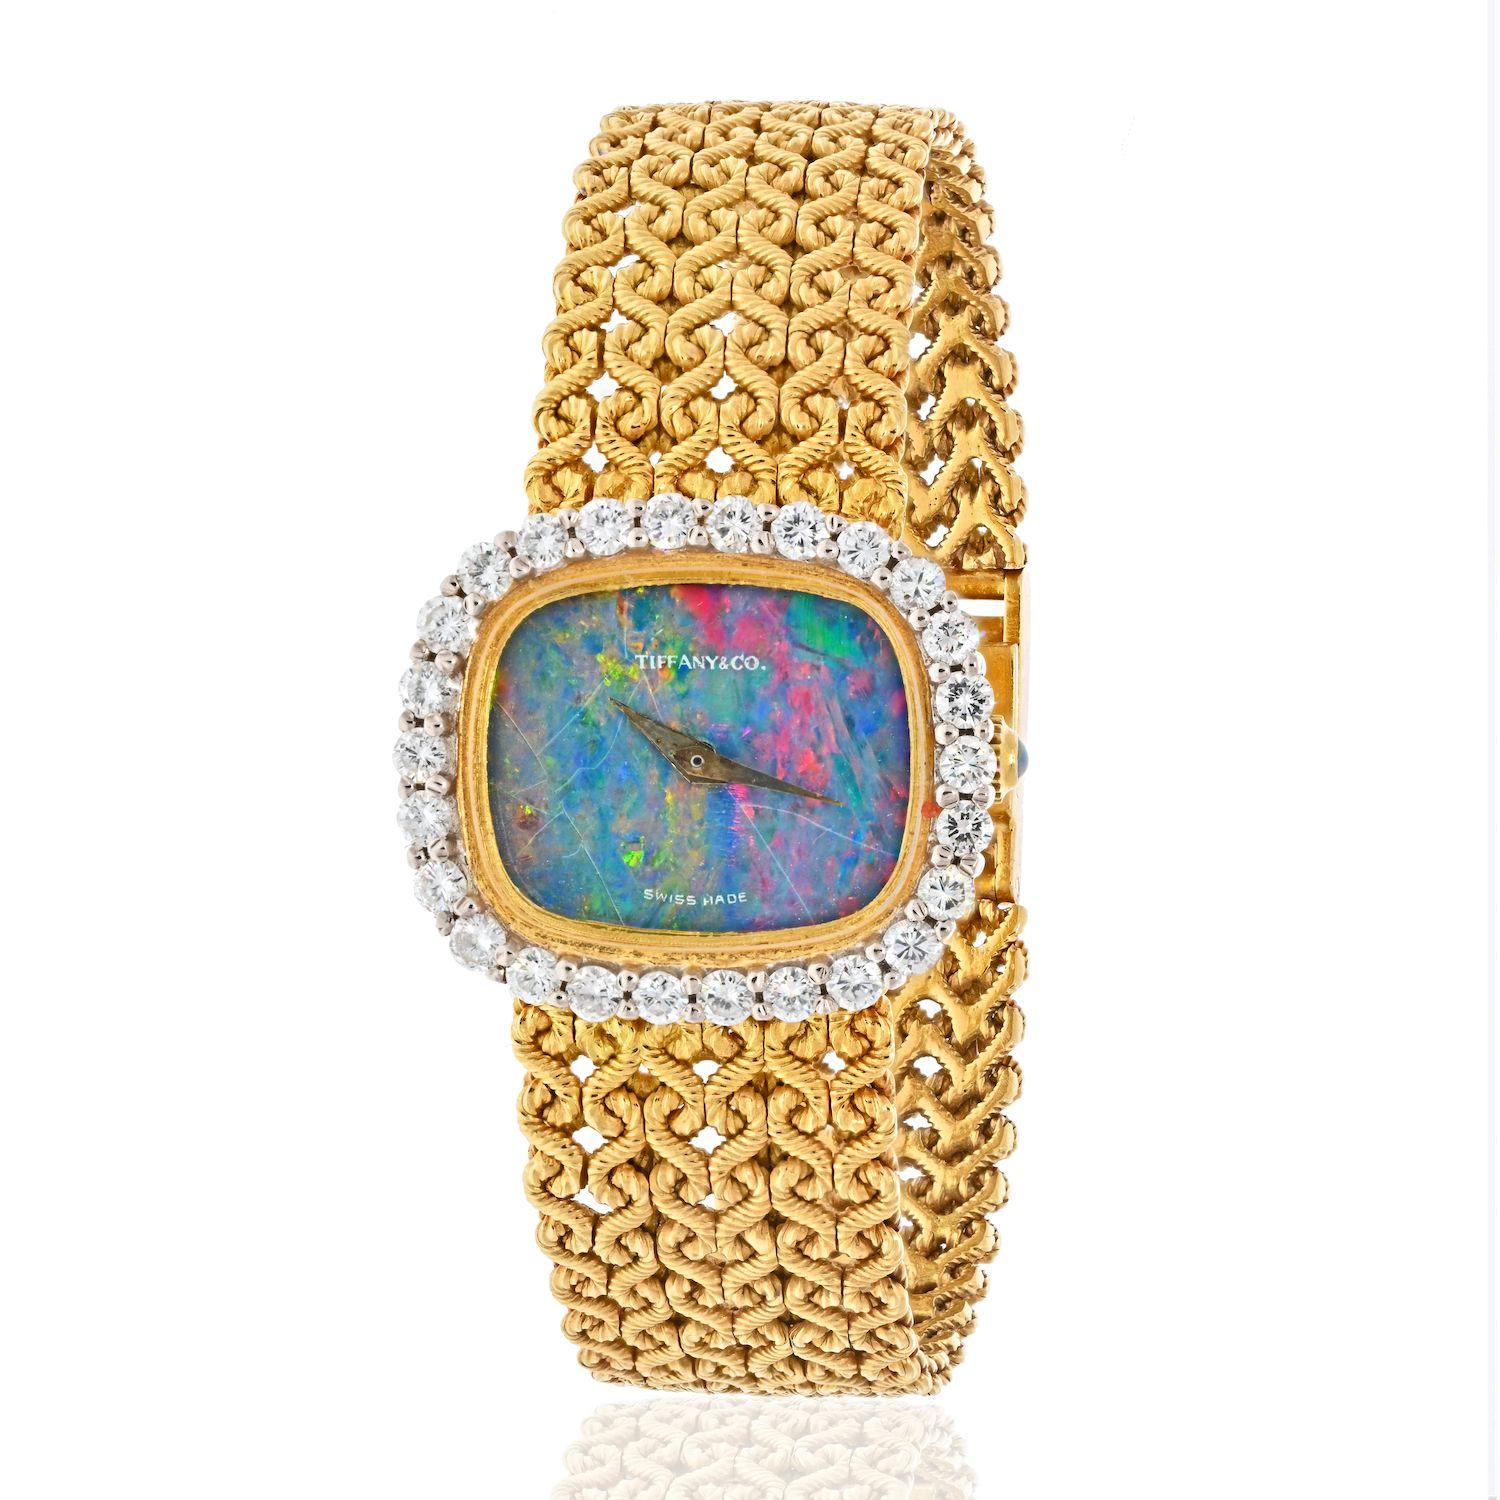 Quartz movement, opal dial and crown, round diamonds, 18k yellow gold, signed Tiffany & Co., Swiss made, Germany, numbered

Size/Dimensions: case 23.35 mm, 15.5 cm (61/8 in)
Gross Weight: 43.7 grams

Movement runs and sets as it should. Service is